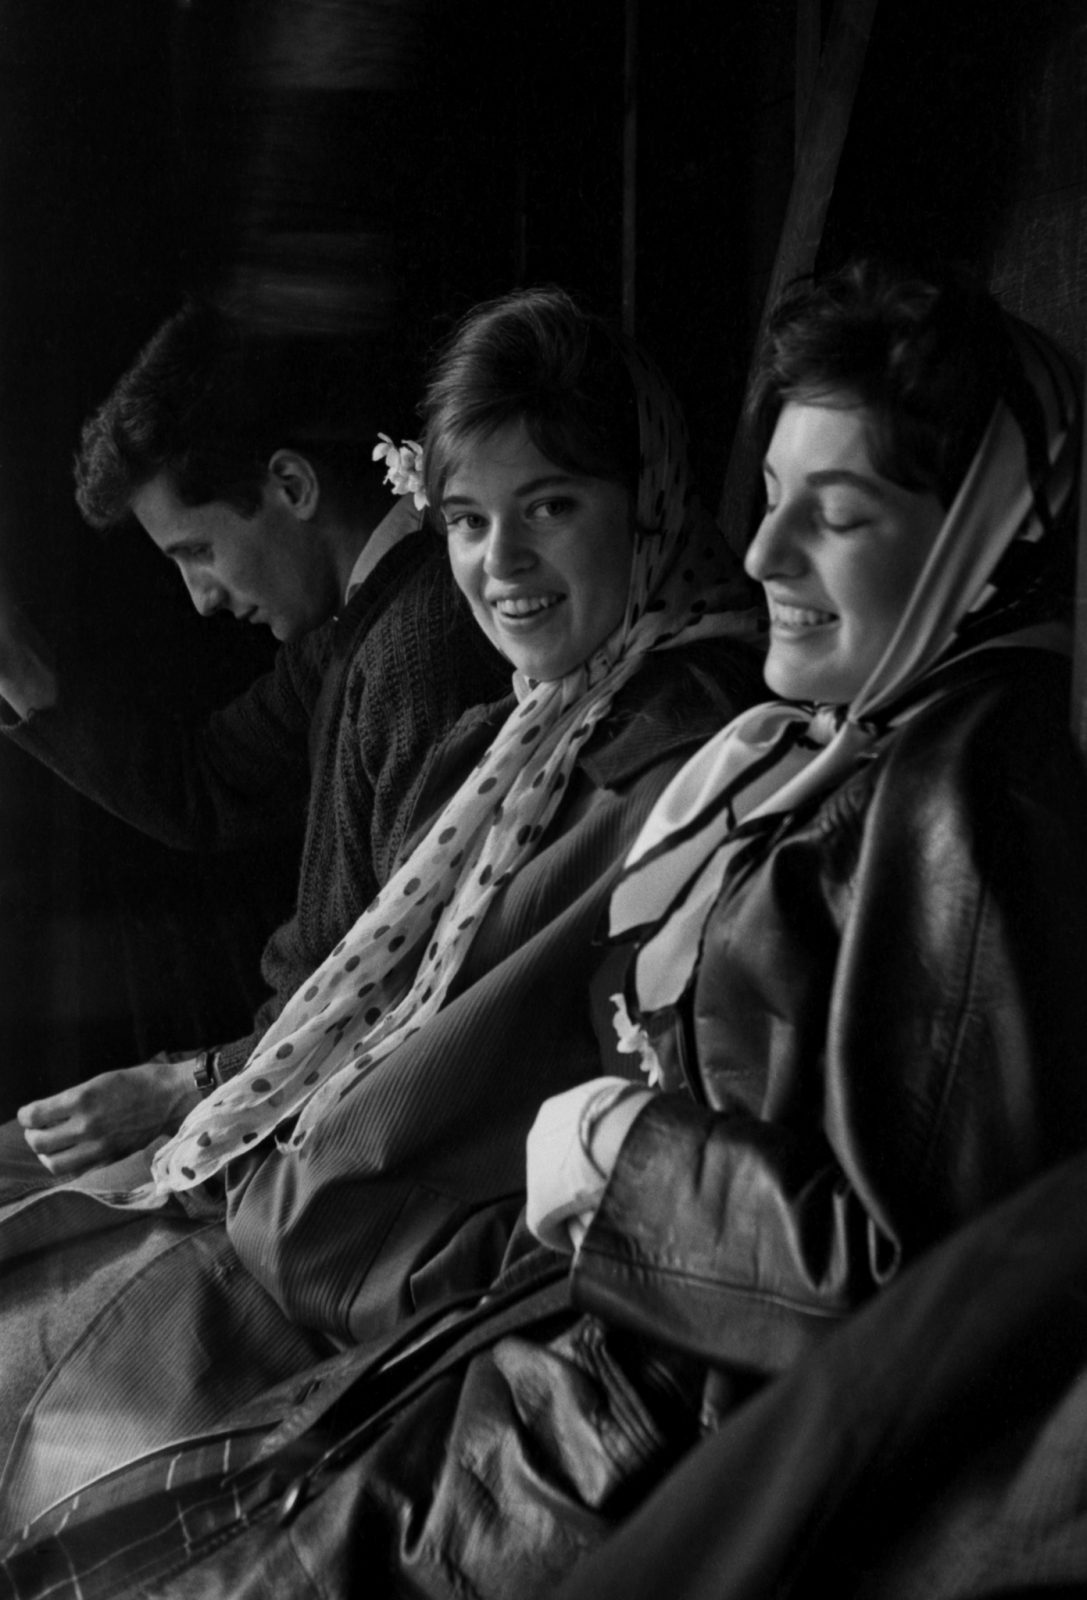 One man in shadows with his head down with two women next to him grinning and seemingly laughing coming into the light with more of their self on display in the light